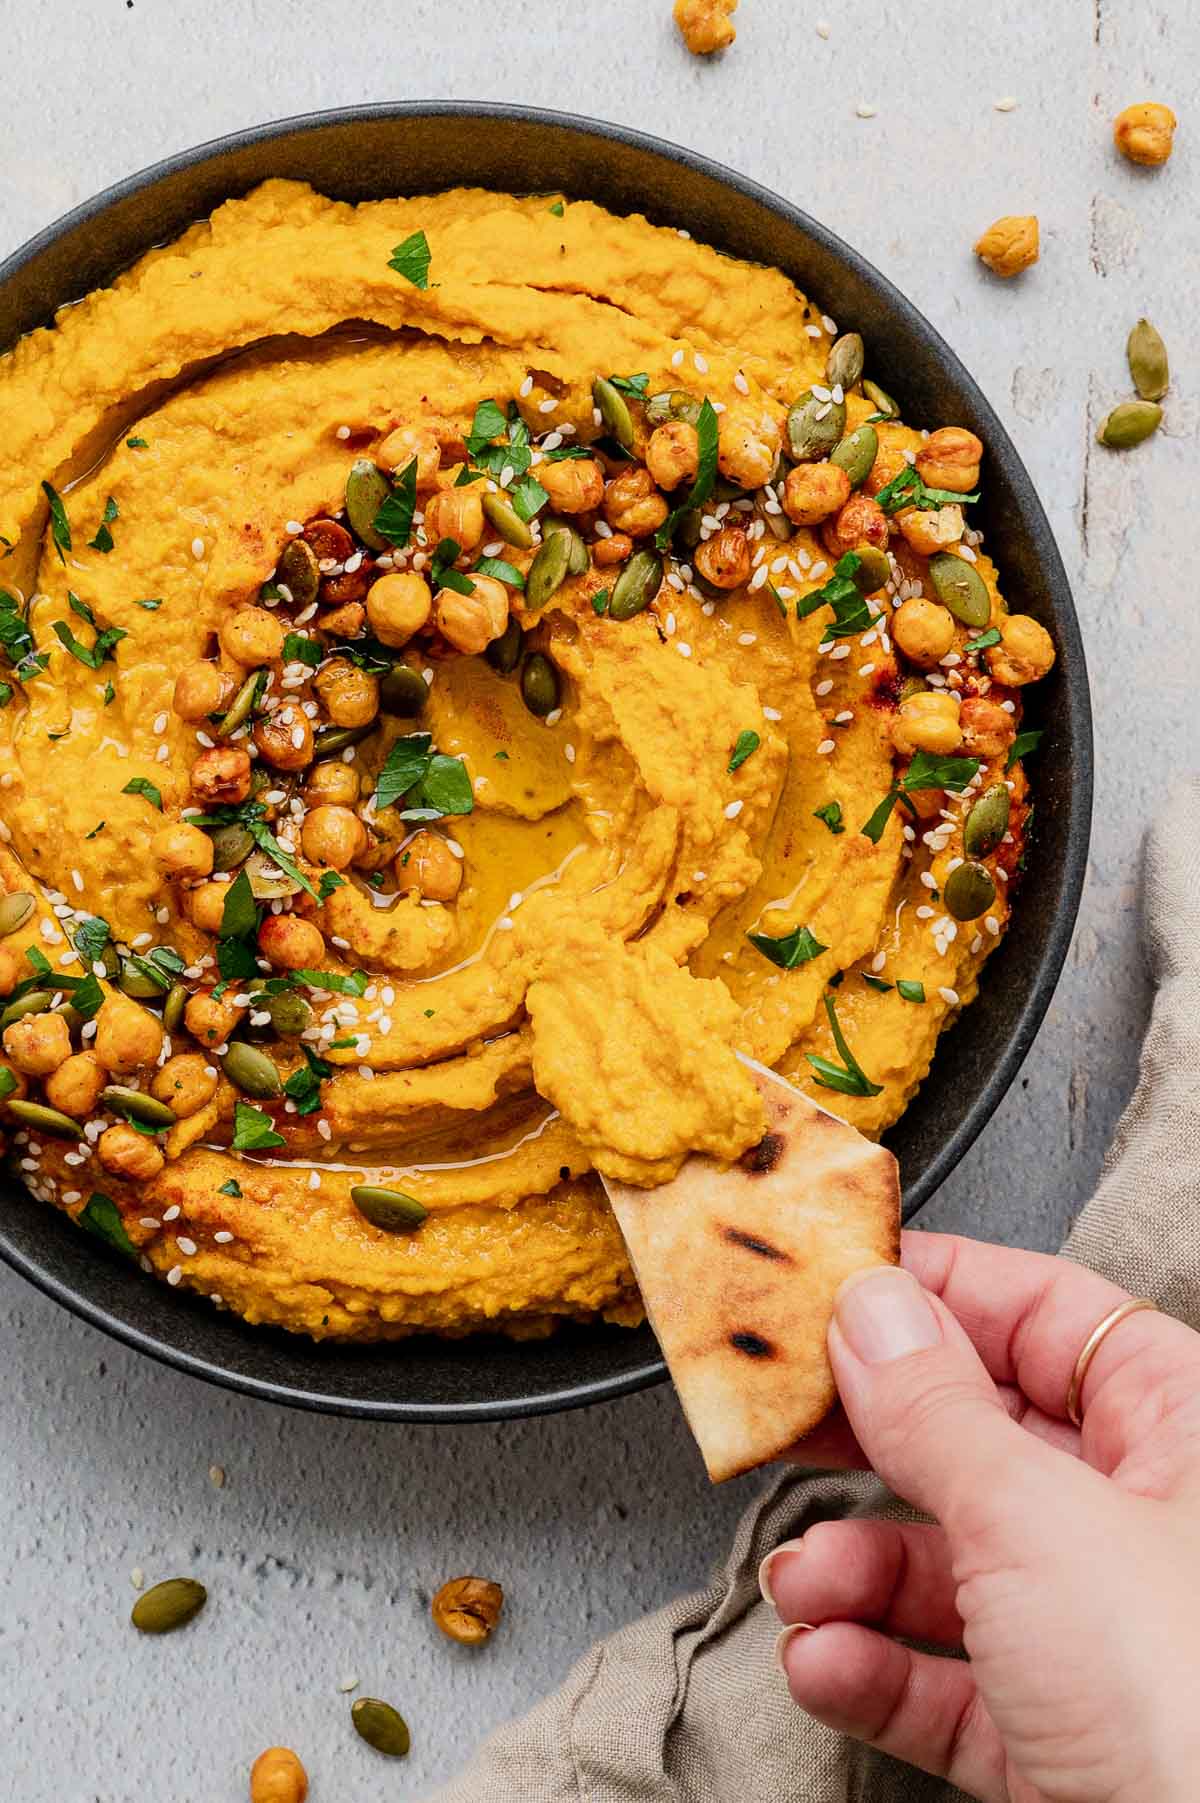 Pumpin hummus topped with chickpeas, parsley and sesame seeds, a hand holds a pita triangle.